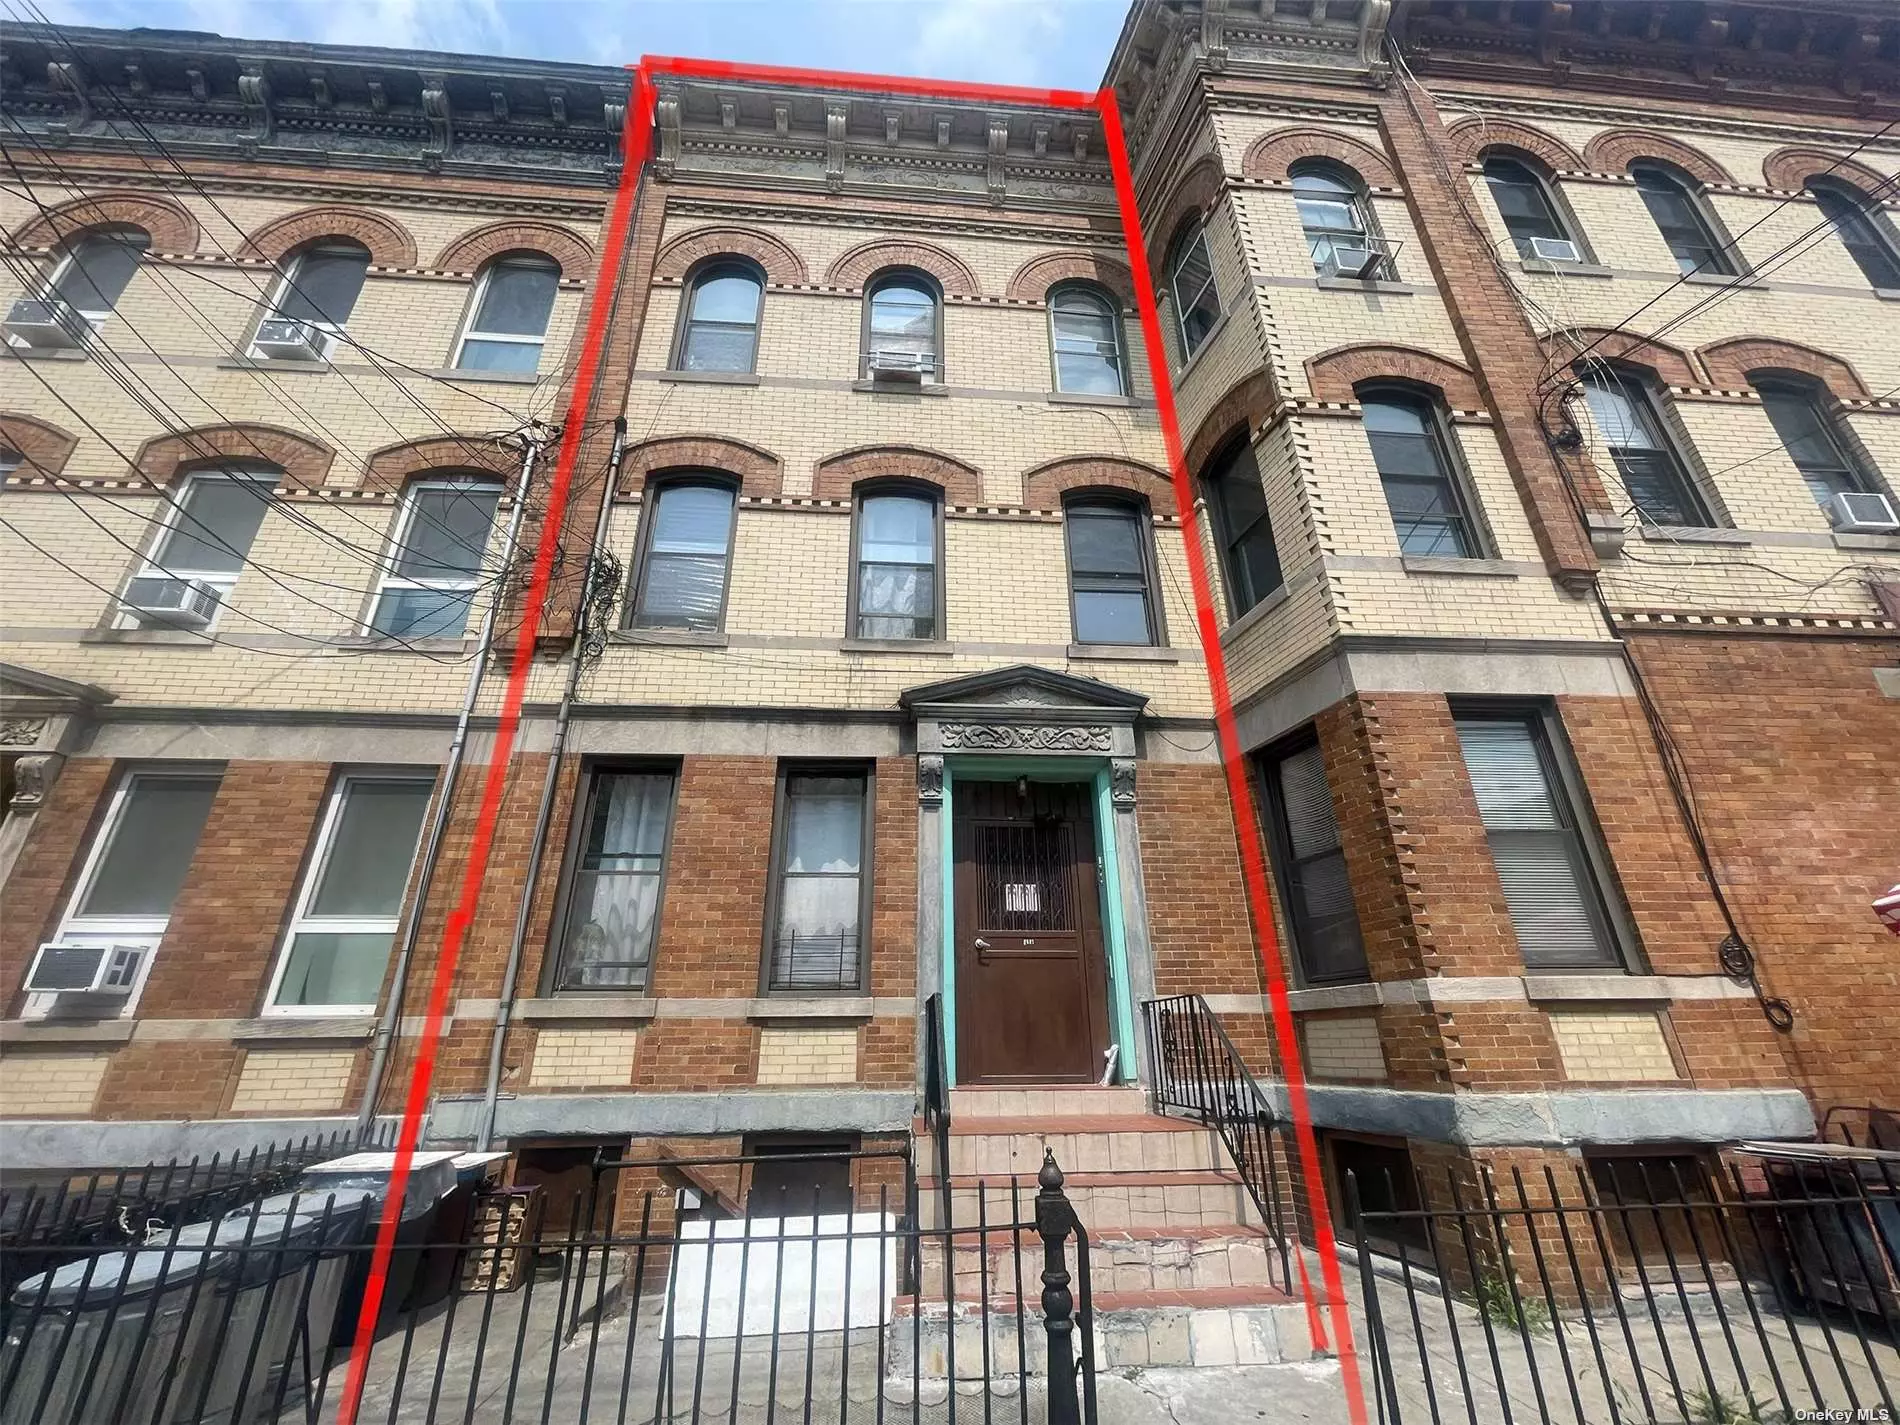 Large 6 family rent stabilized building in the prime location of Ridgewood, delivering 4 apts vacant. All tenants pay rent on time. Rent registered to DHCR every year.